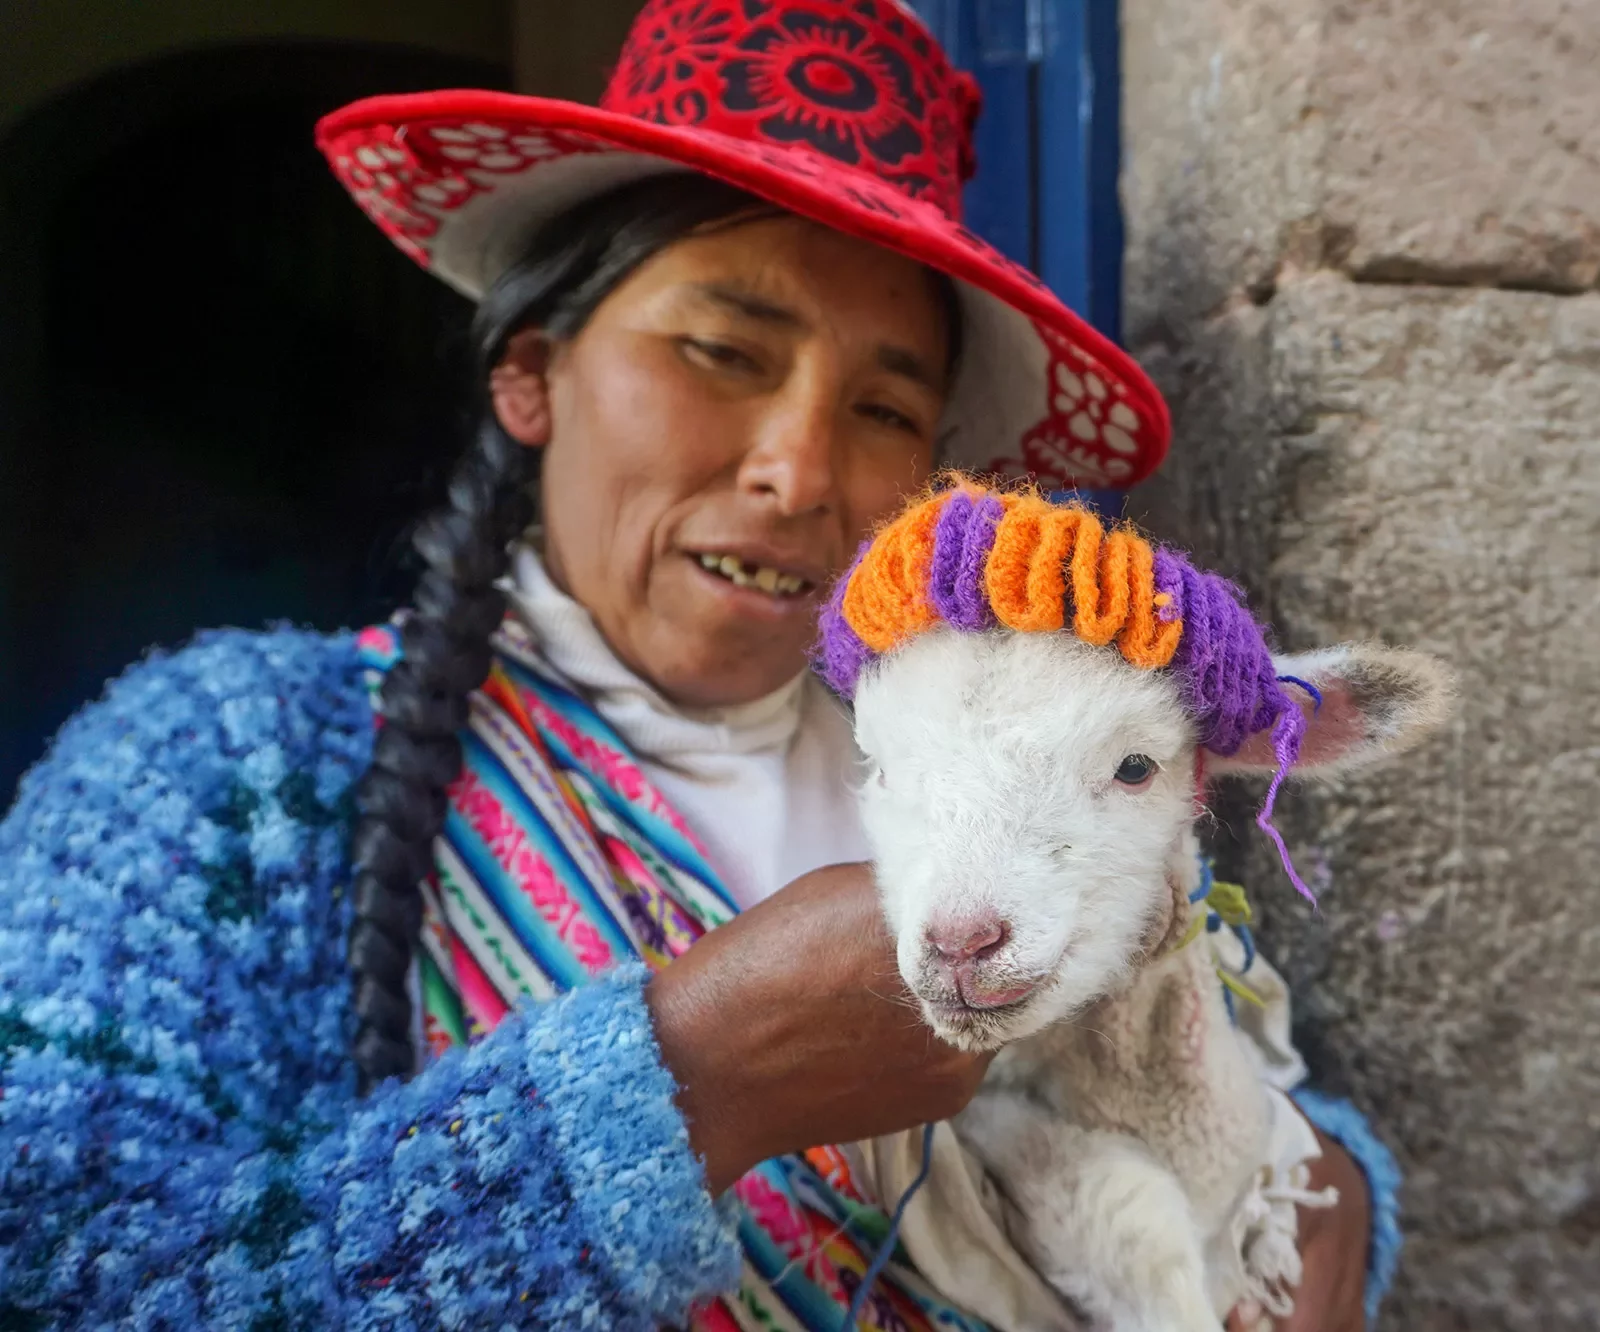 Local woman holding a small white goat, both facing camera.